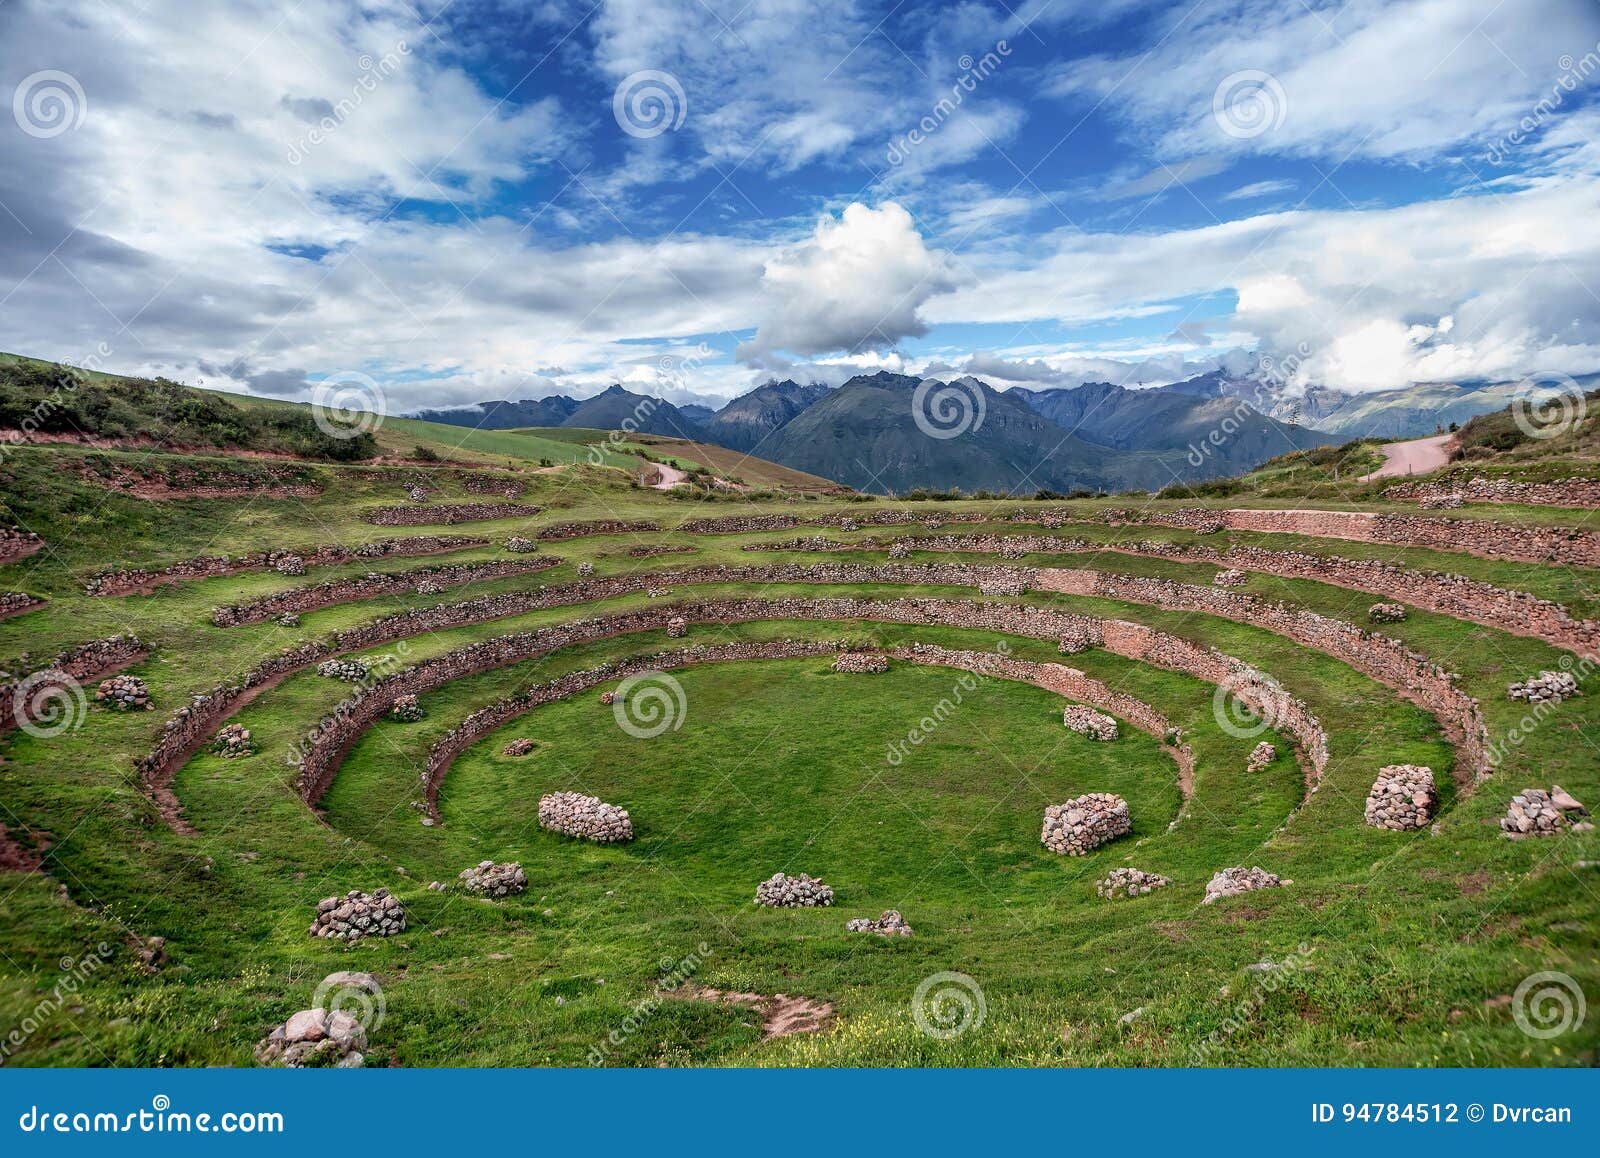 inca agricultural research station, moray, peru